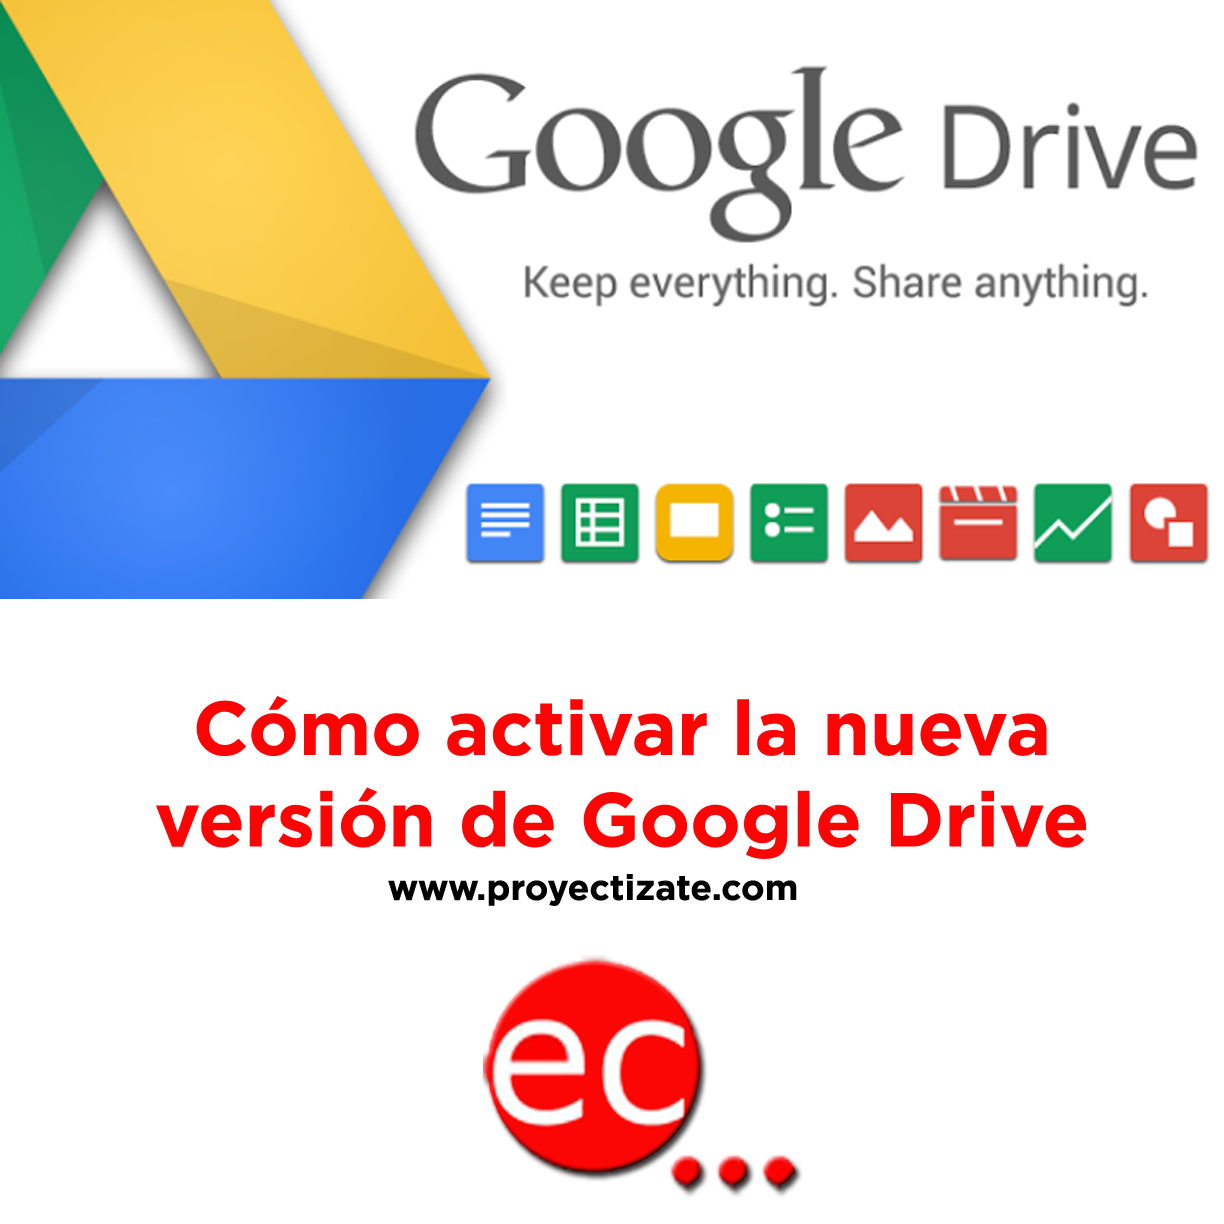 download the new version Google Drive 77.0.3